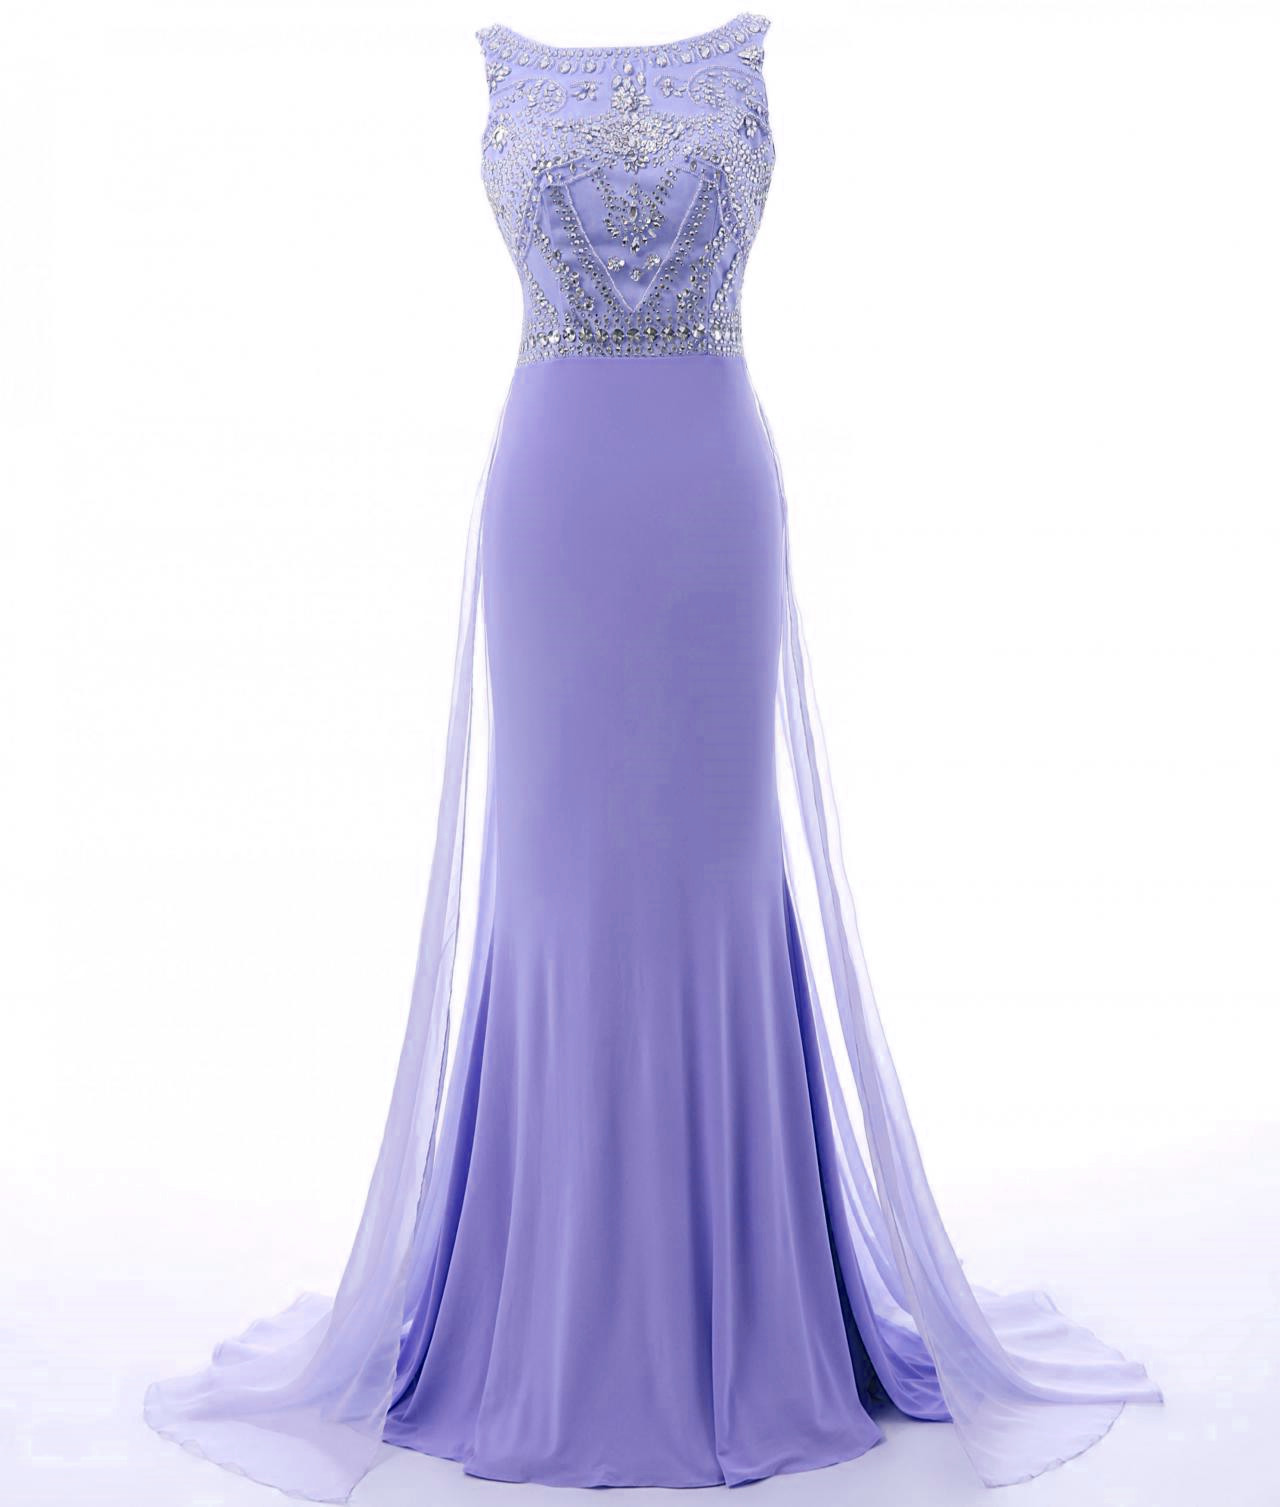 Ever-Pretty Strapless Long Bridesmaid Dresses Lavender Evening Prom Gowns 07057 